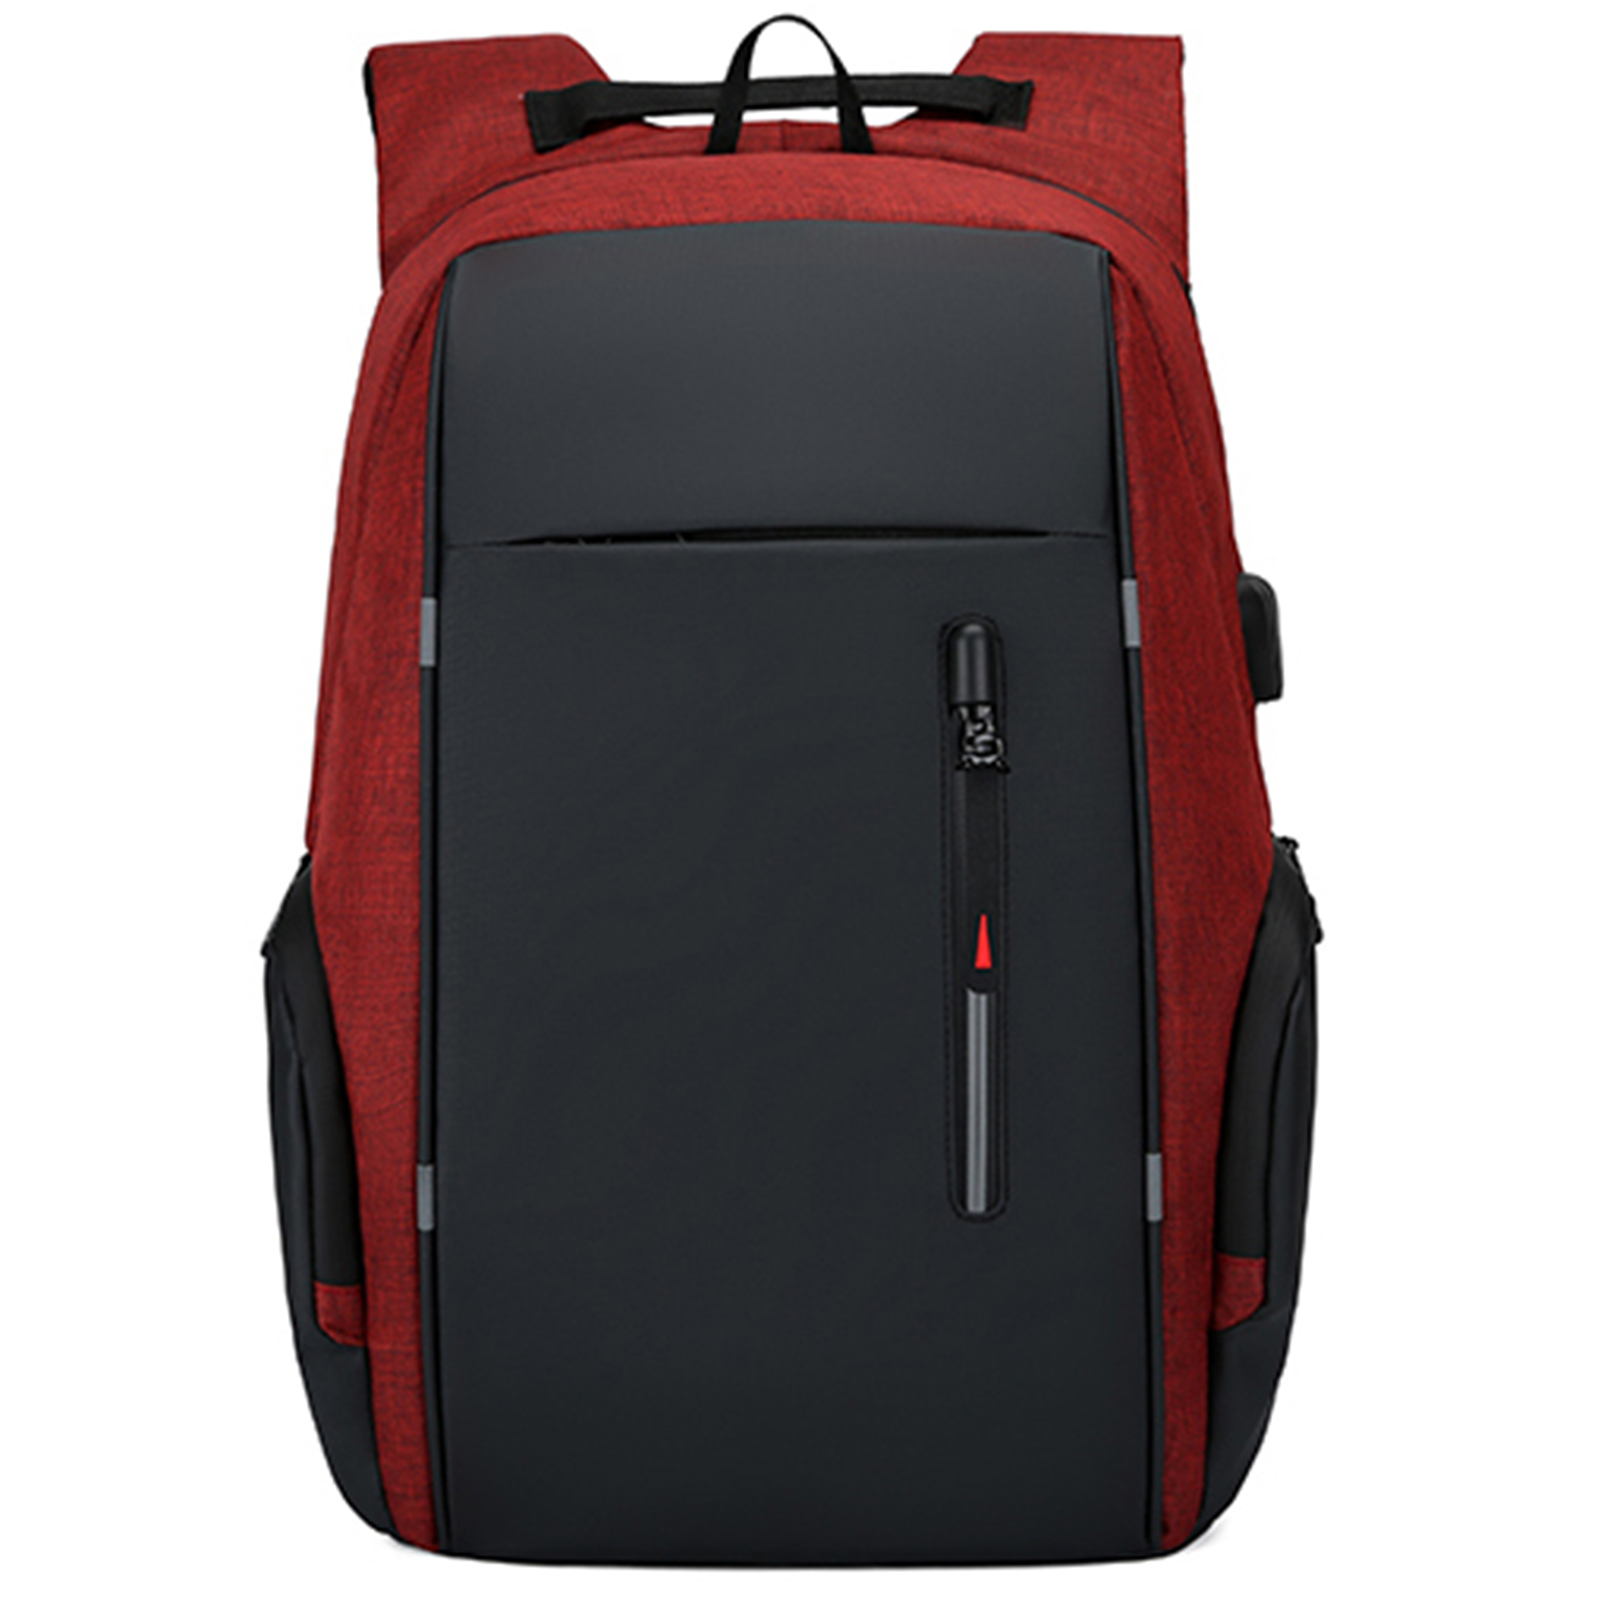 Laptop Backpack For 17 Inch Laptop Bag With USB Port Fashion Waterproof Backpacks